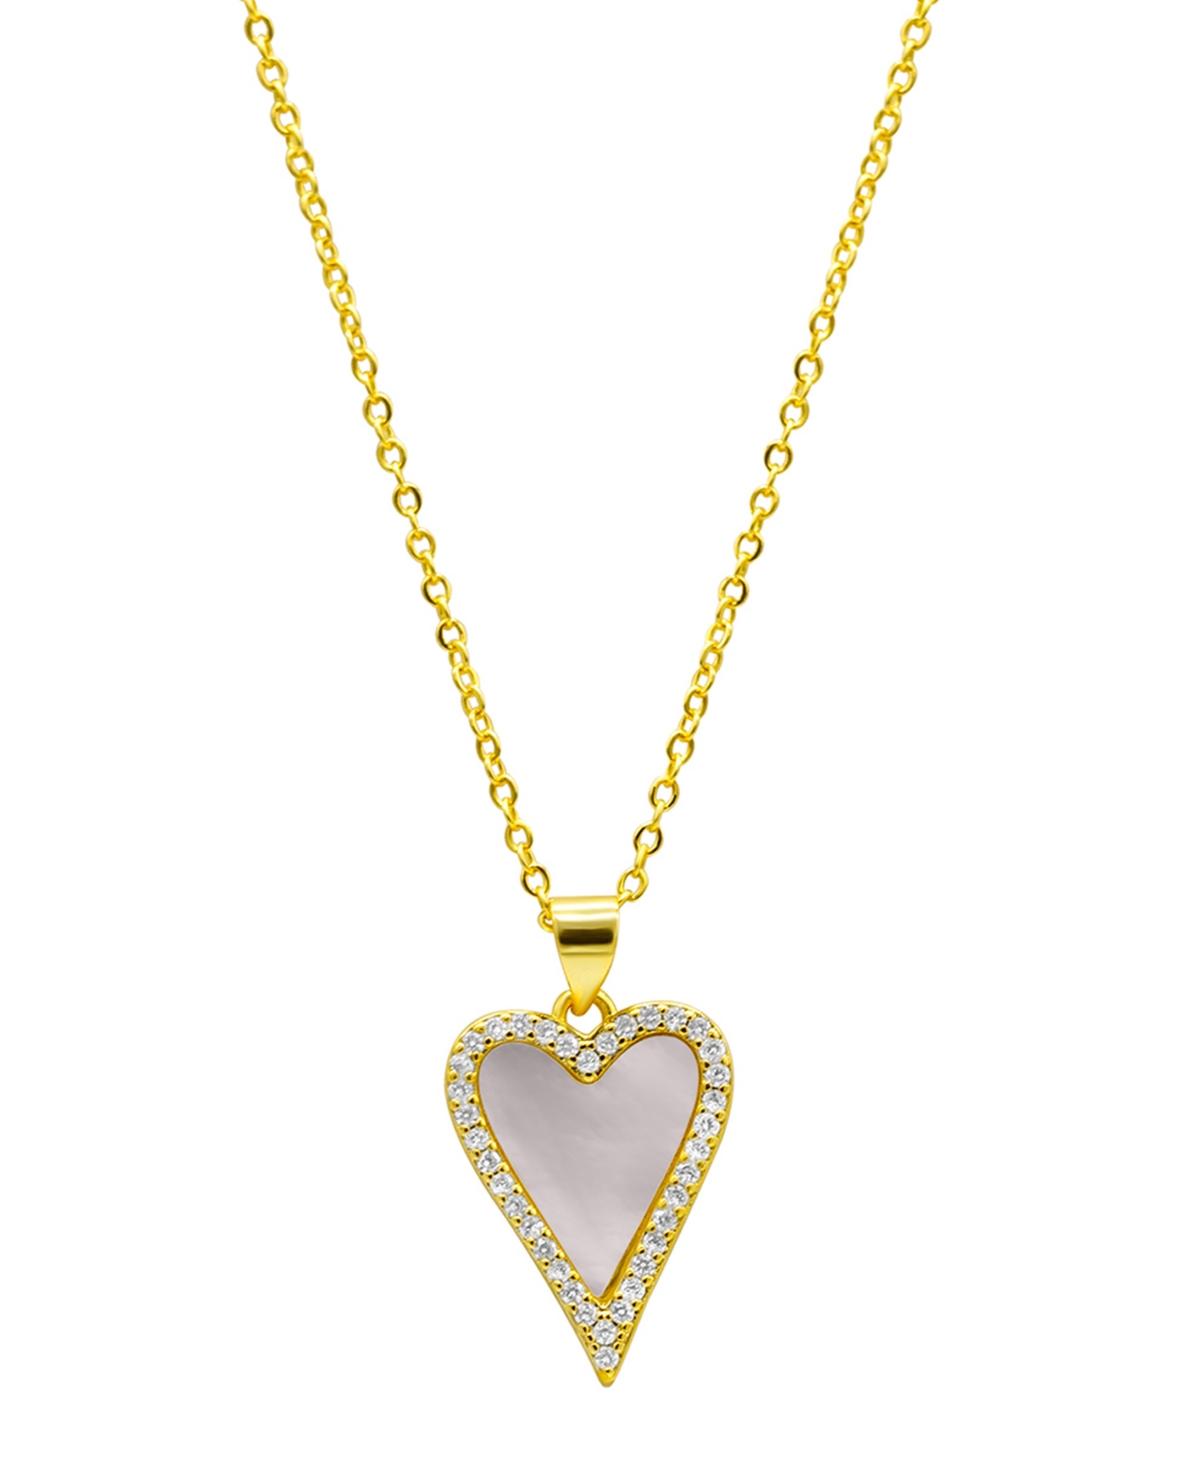 14K Gold-Plated White Mother-of-Pearl Crystal Halo Heart Necklace - Gold